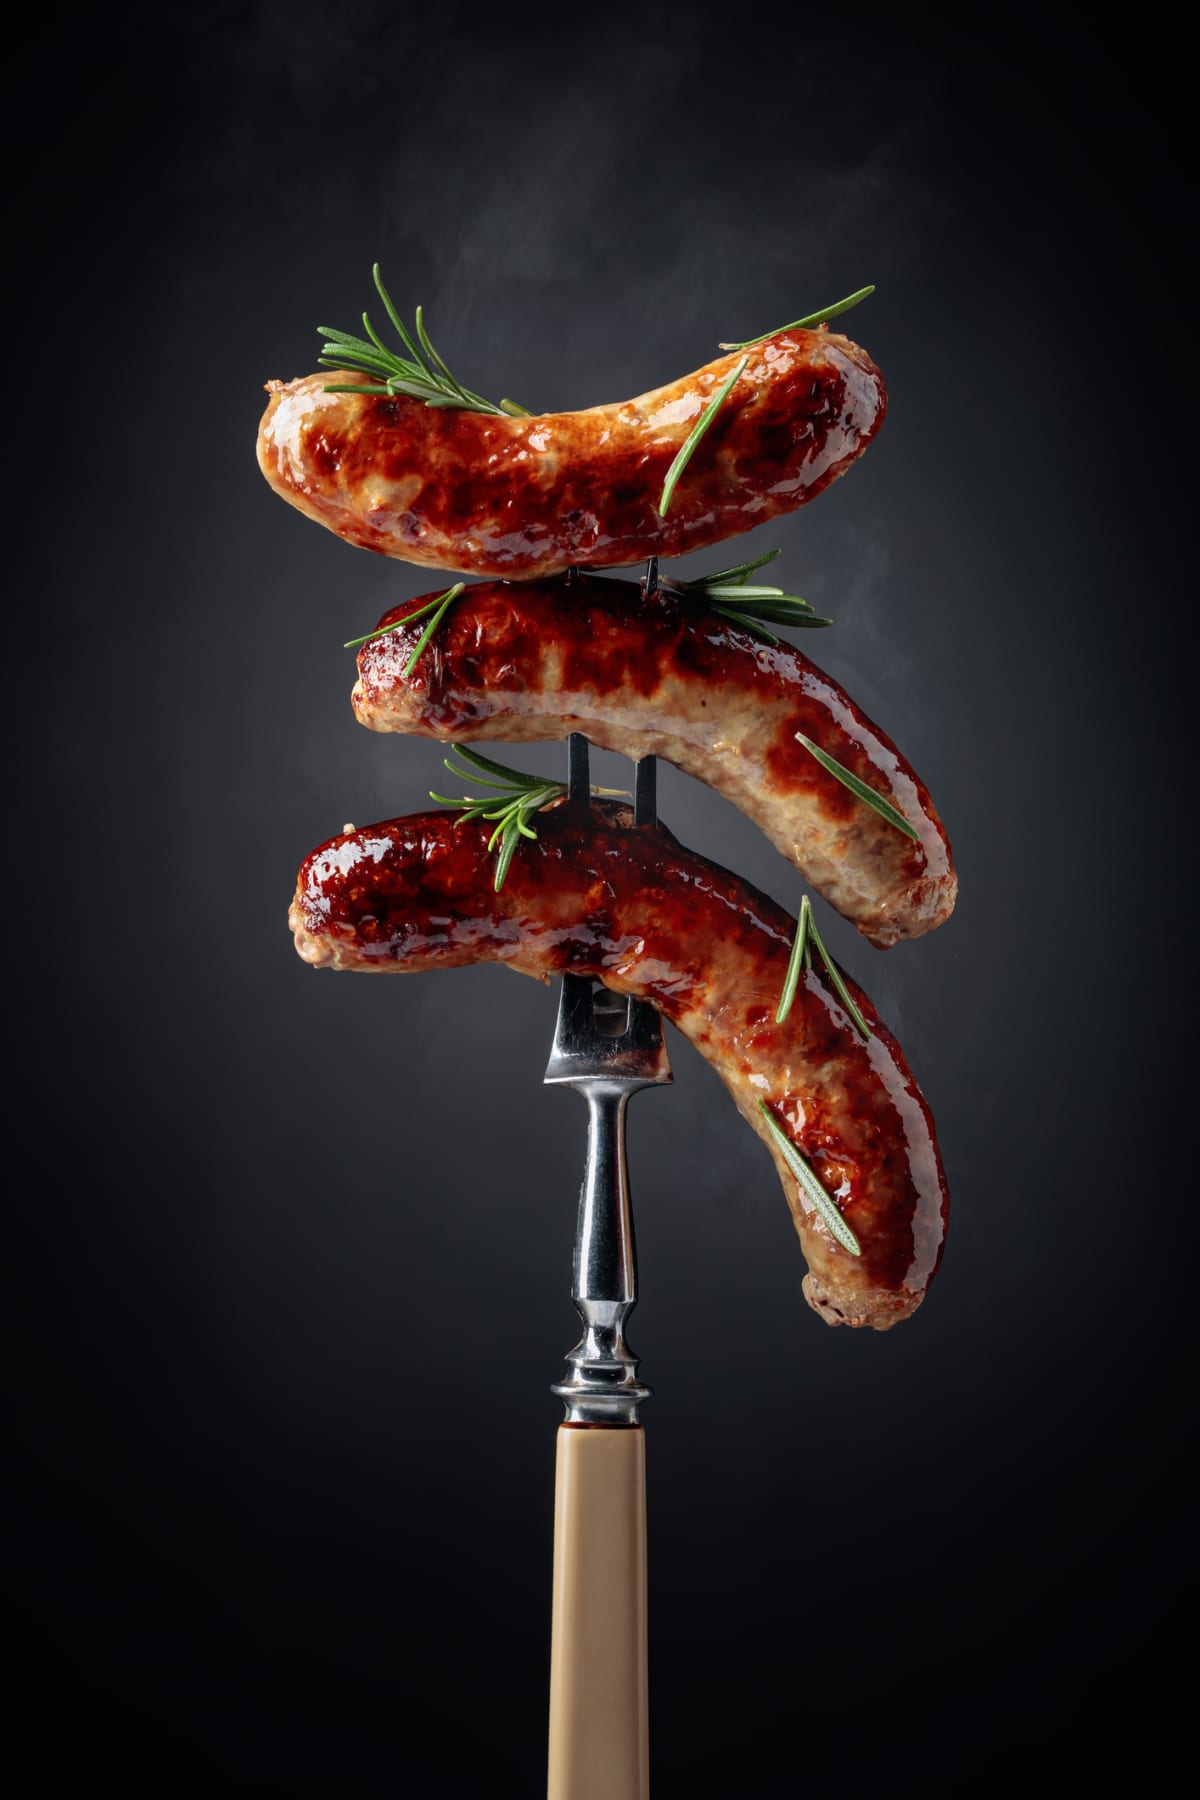 Grilled Bavarian sausages with rosemary on a fork on dark background